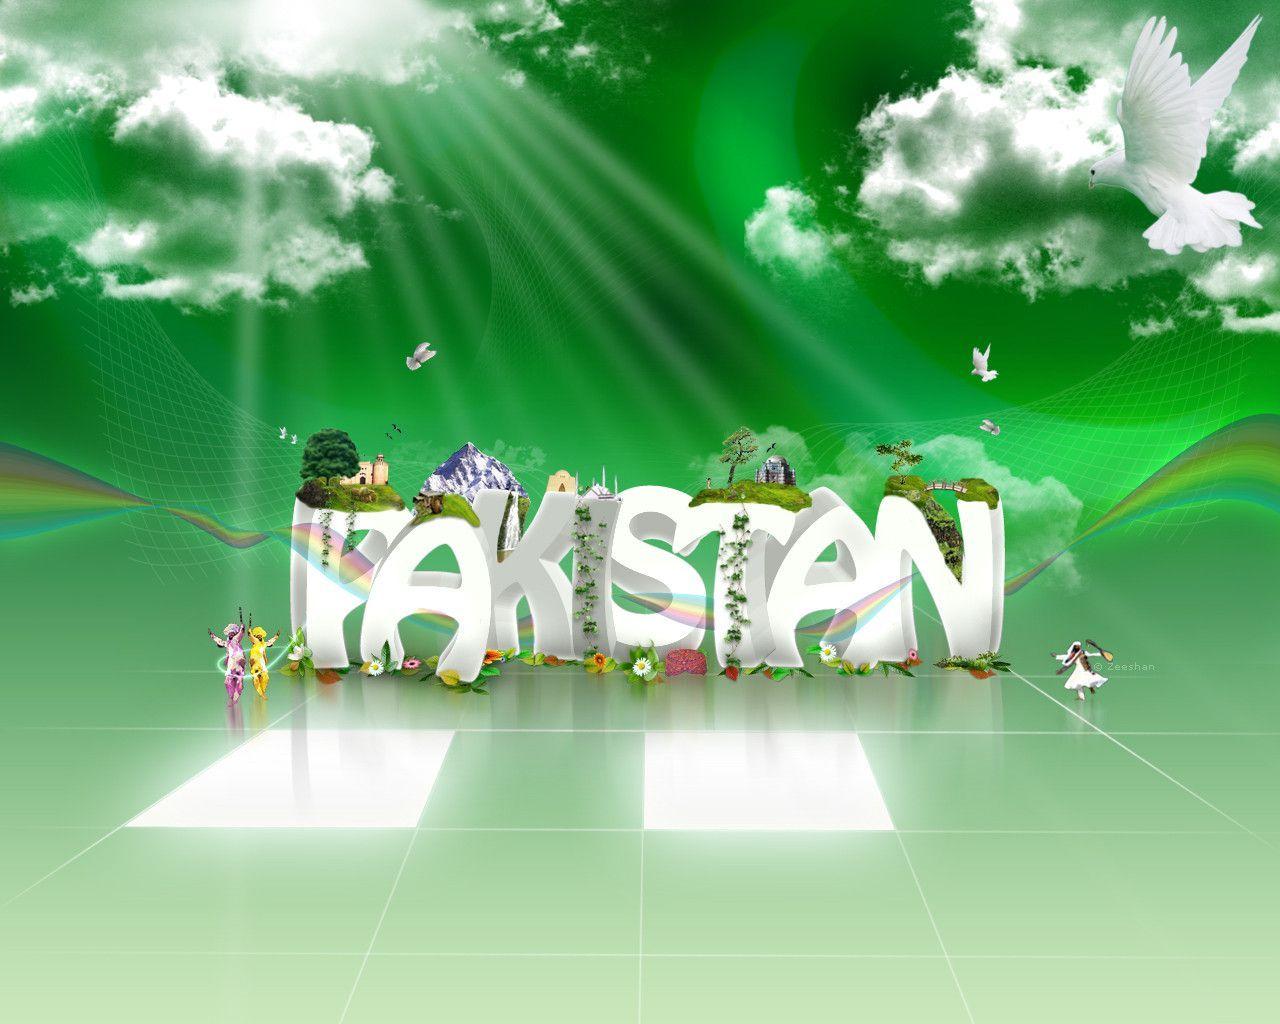 Pakistan Day Wallpaper Gallery March 2012, On This Day